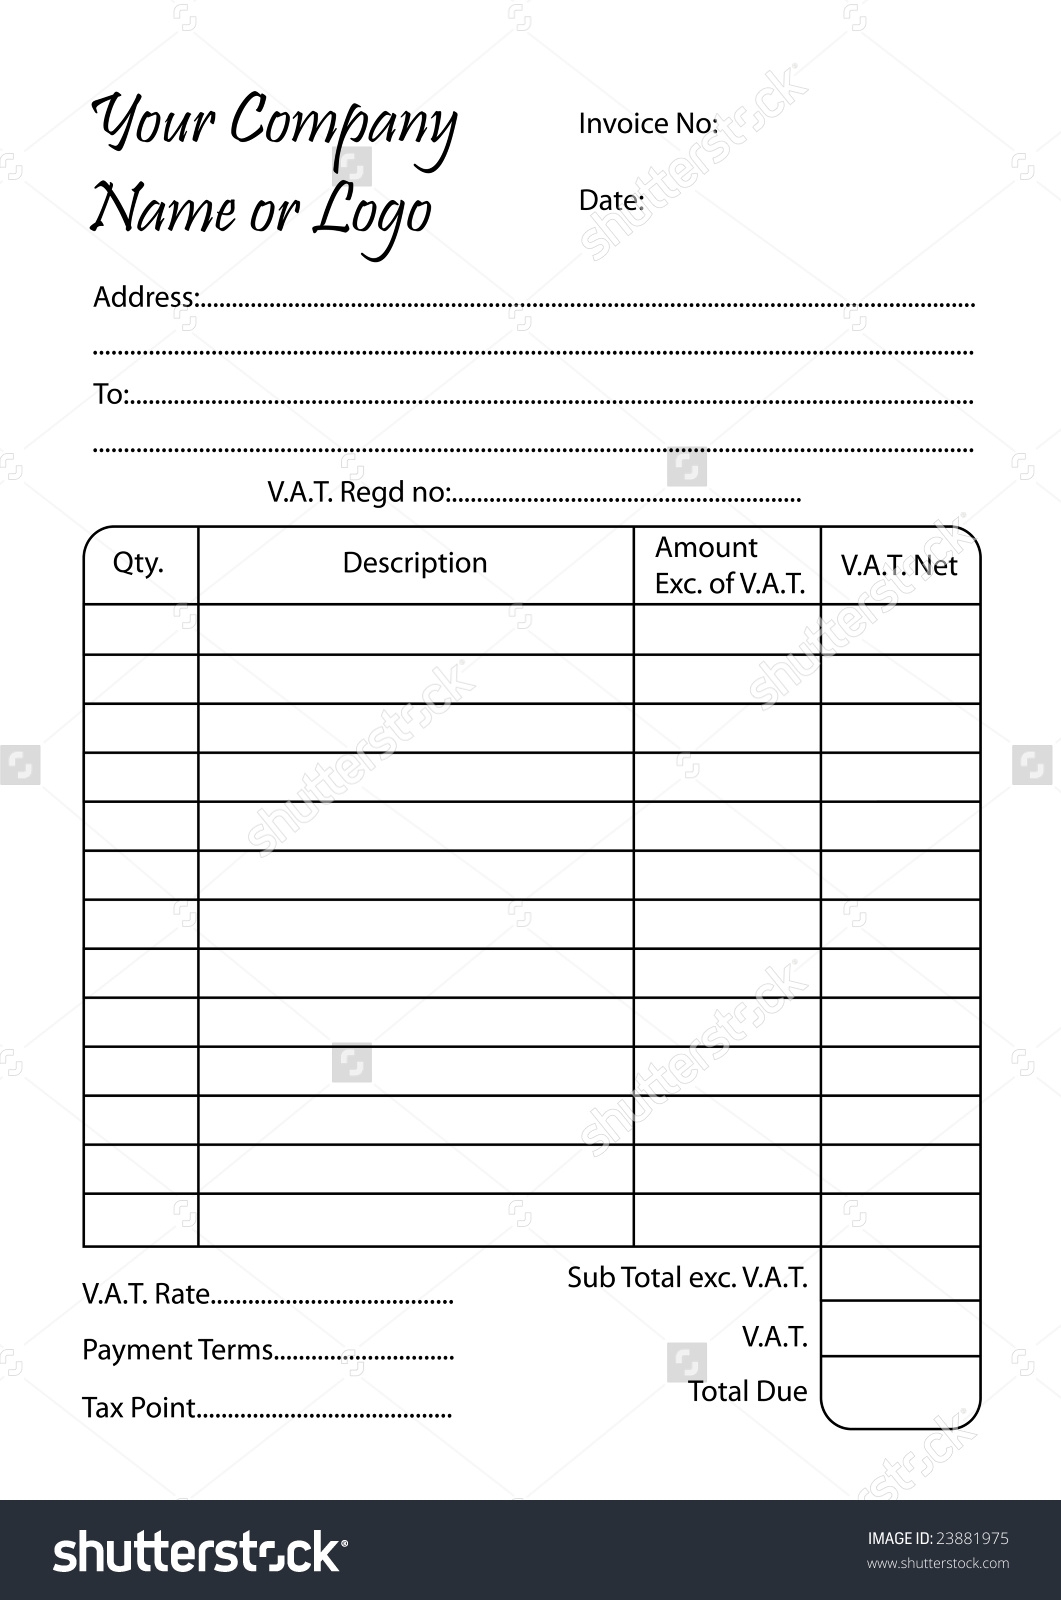 invoice book template invoice book vector illustration of a bill pad template 1061 X 1600